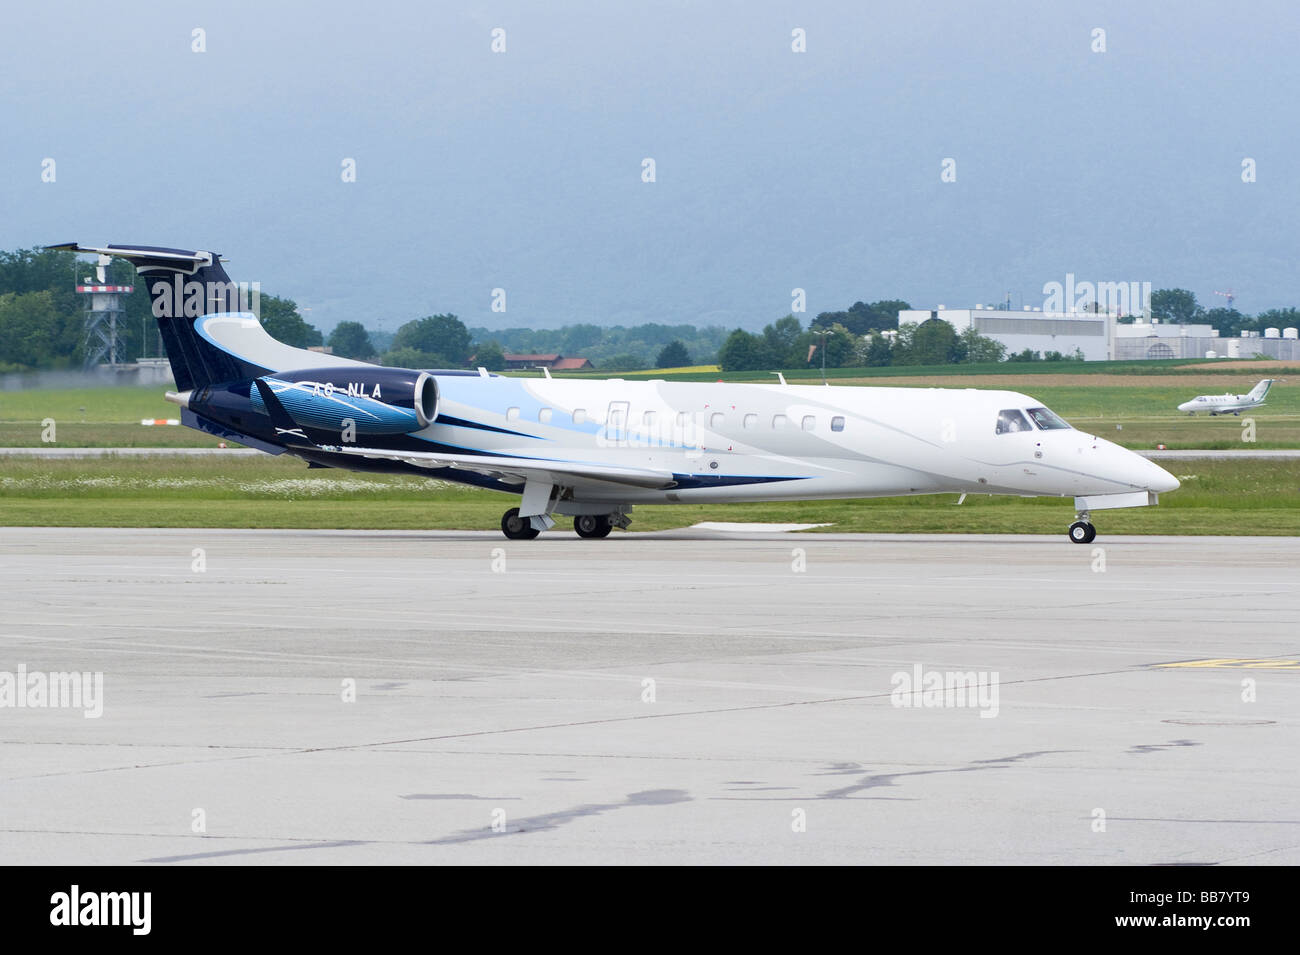 An Embraer ERJ-135BJ Legacy 600 Business Jet A6-NLA Taxiing at Geneva Airport Switzerland Geneve Suisse Stock Photo